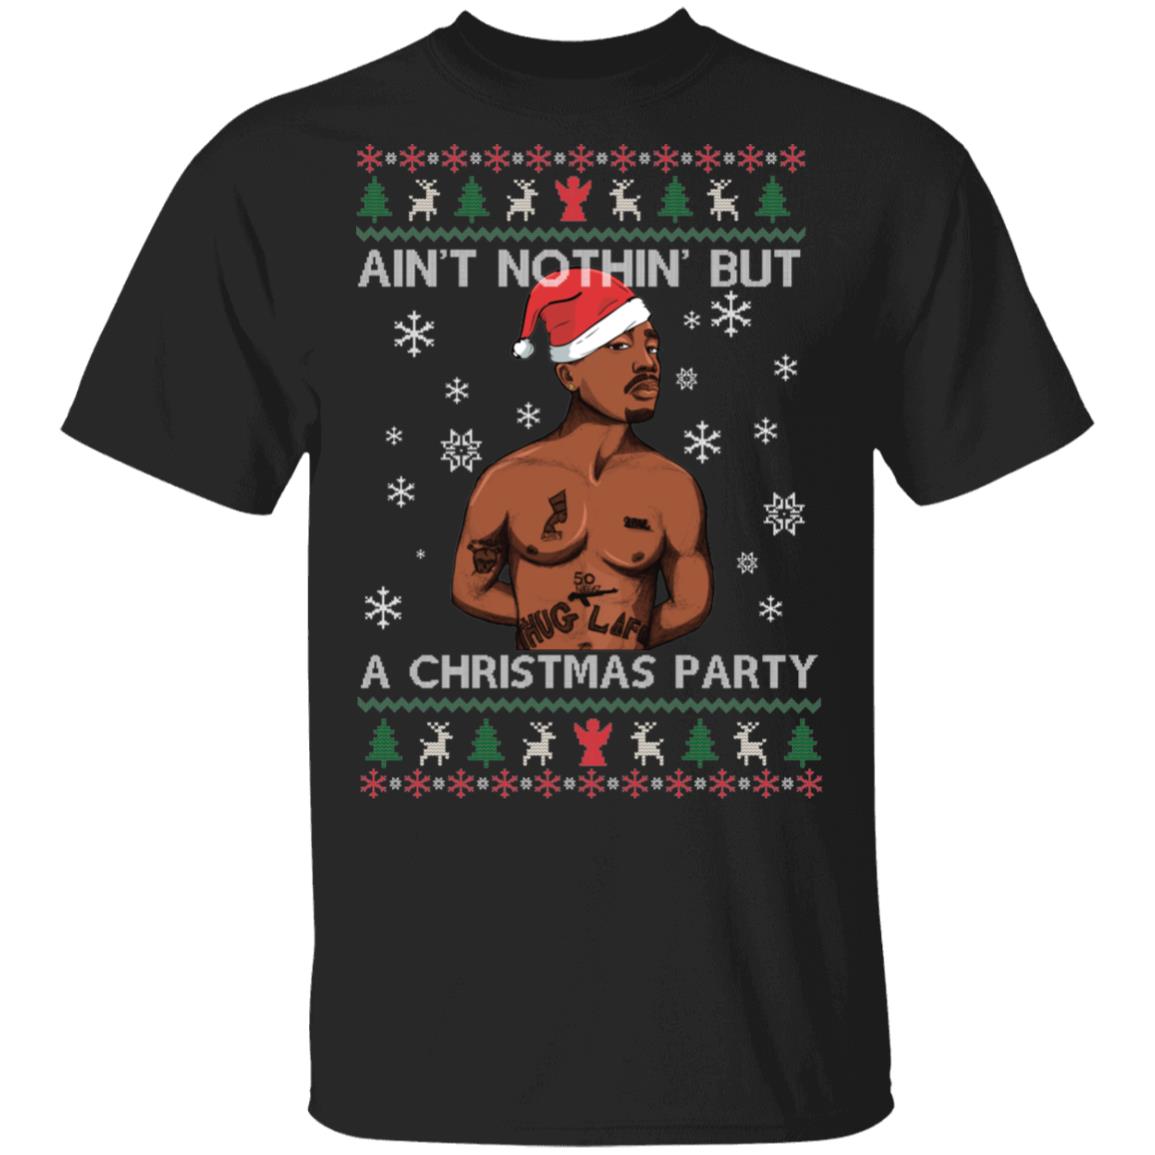 Twas the night before chrizzle and all though the hizzle Snoop Dogg christmas sweatshirt